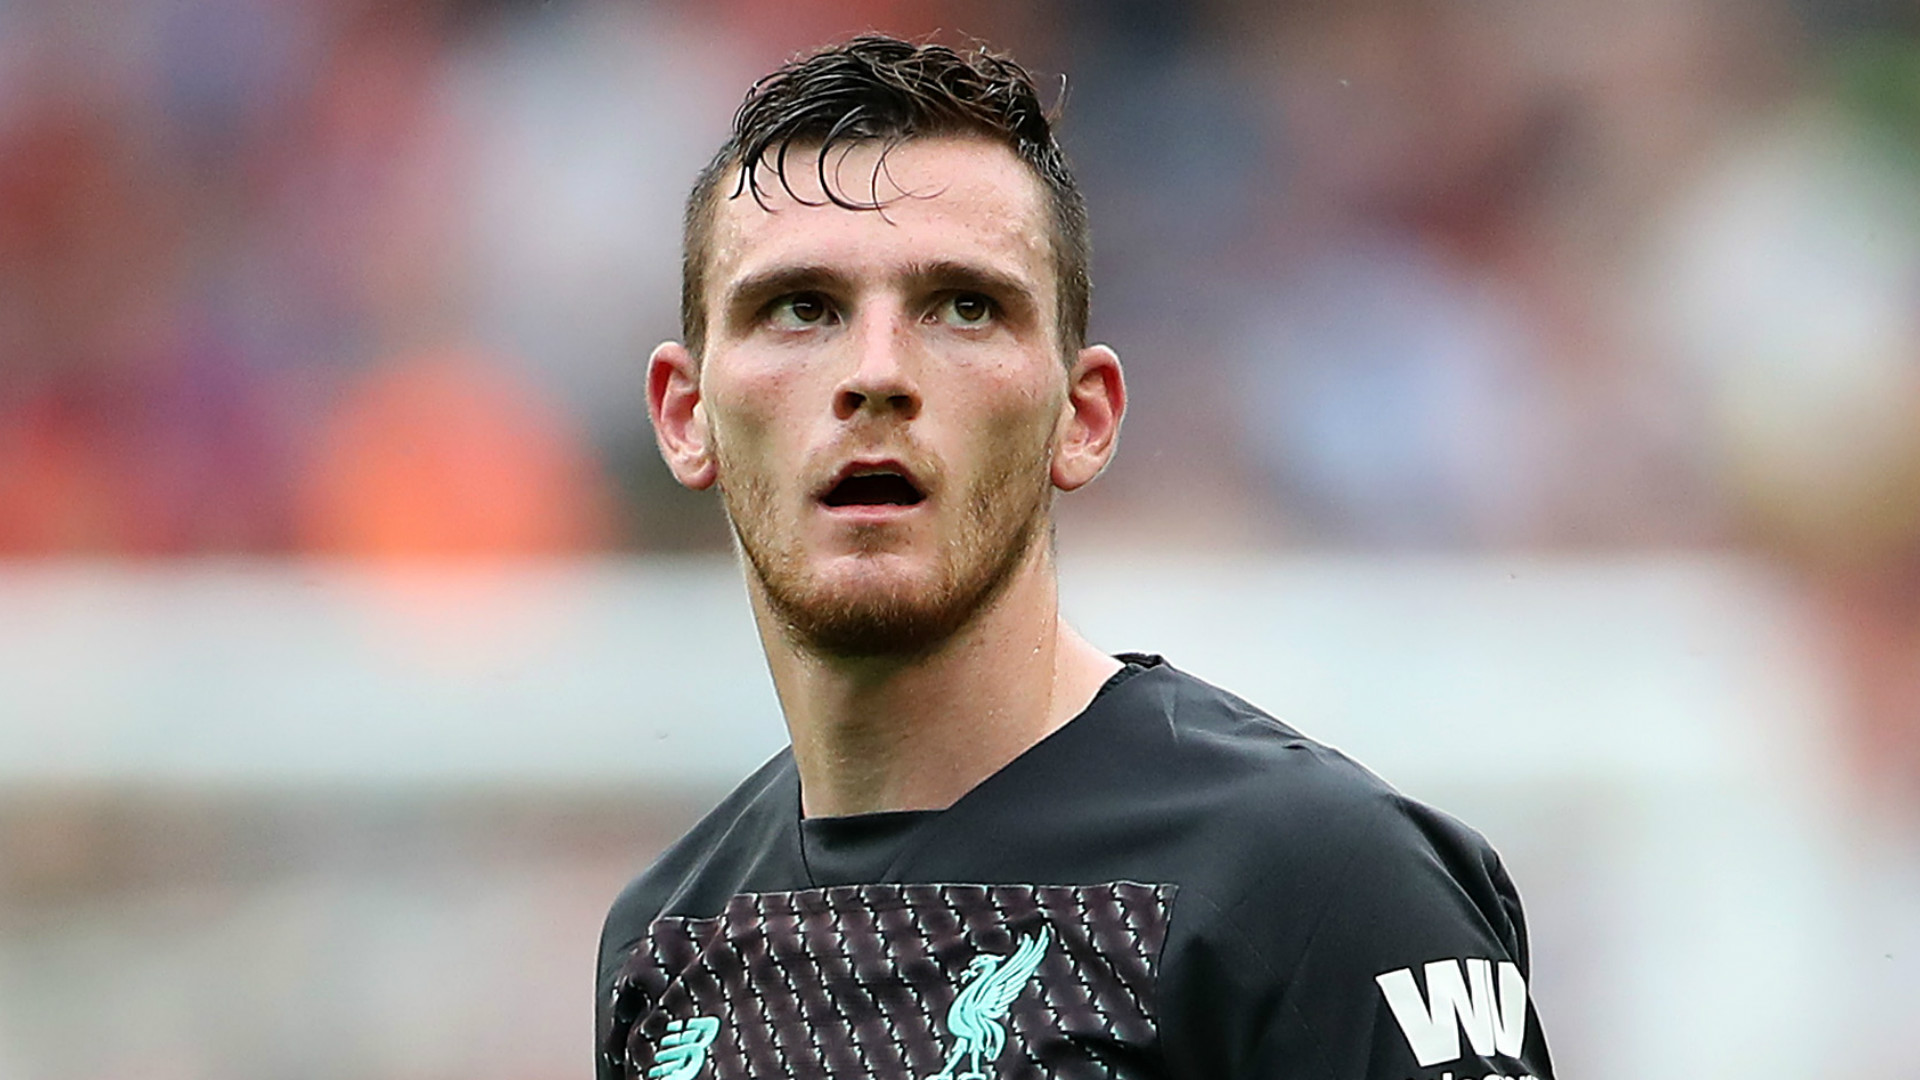 Liverpool full-back Robertson admits he'd 'love' to play for Celtic one day